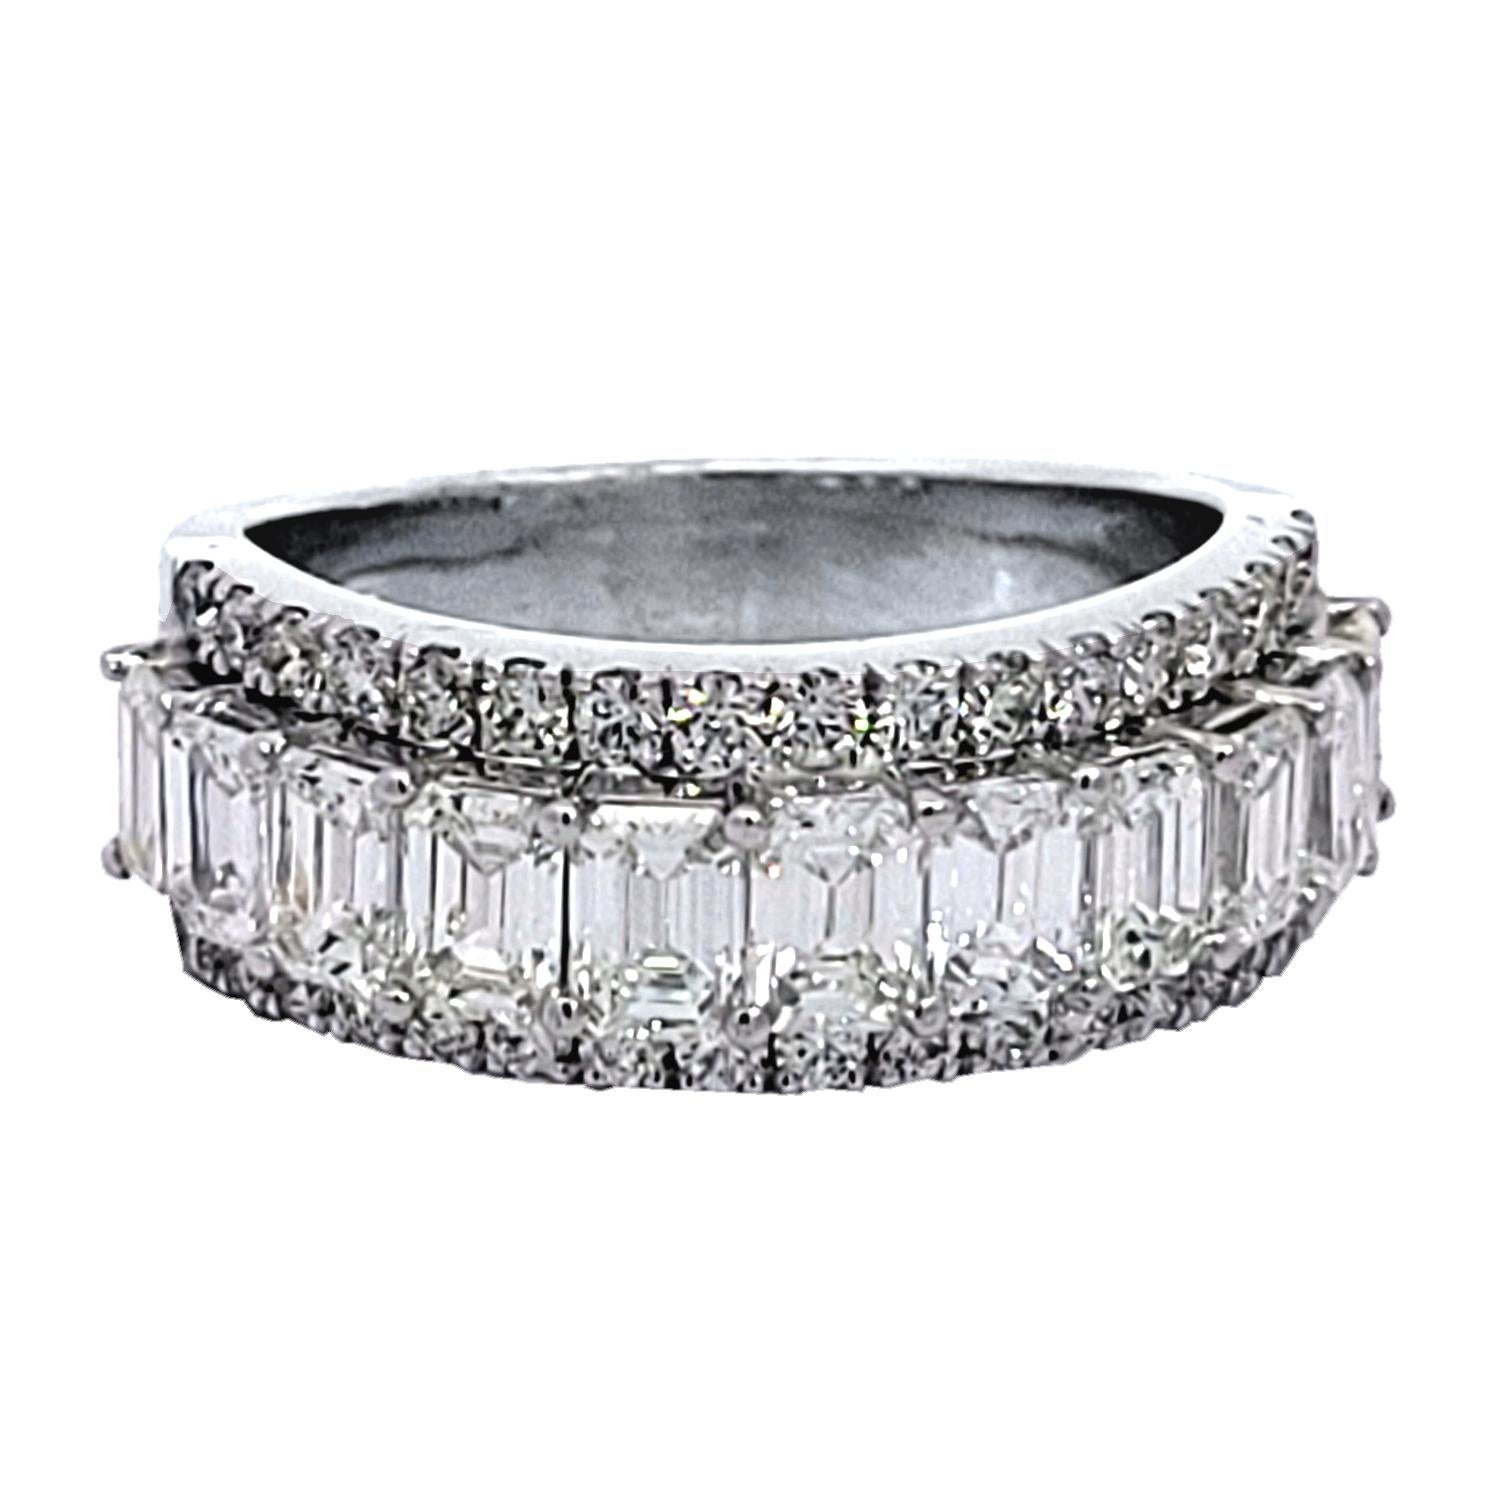 Experience timeless sophistication with this stunning Diamond Anniversary Ring. Perfectly crafted to symbolize everlasting love, its shimmering diamonds exudes luxury and elegance, making it the quintessential wedding or anniversary ring. 

The Ring